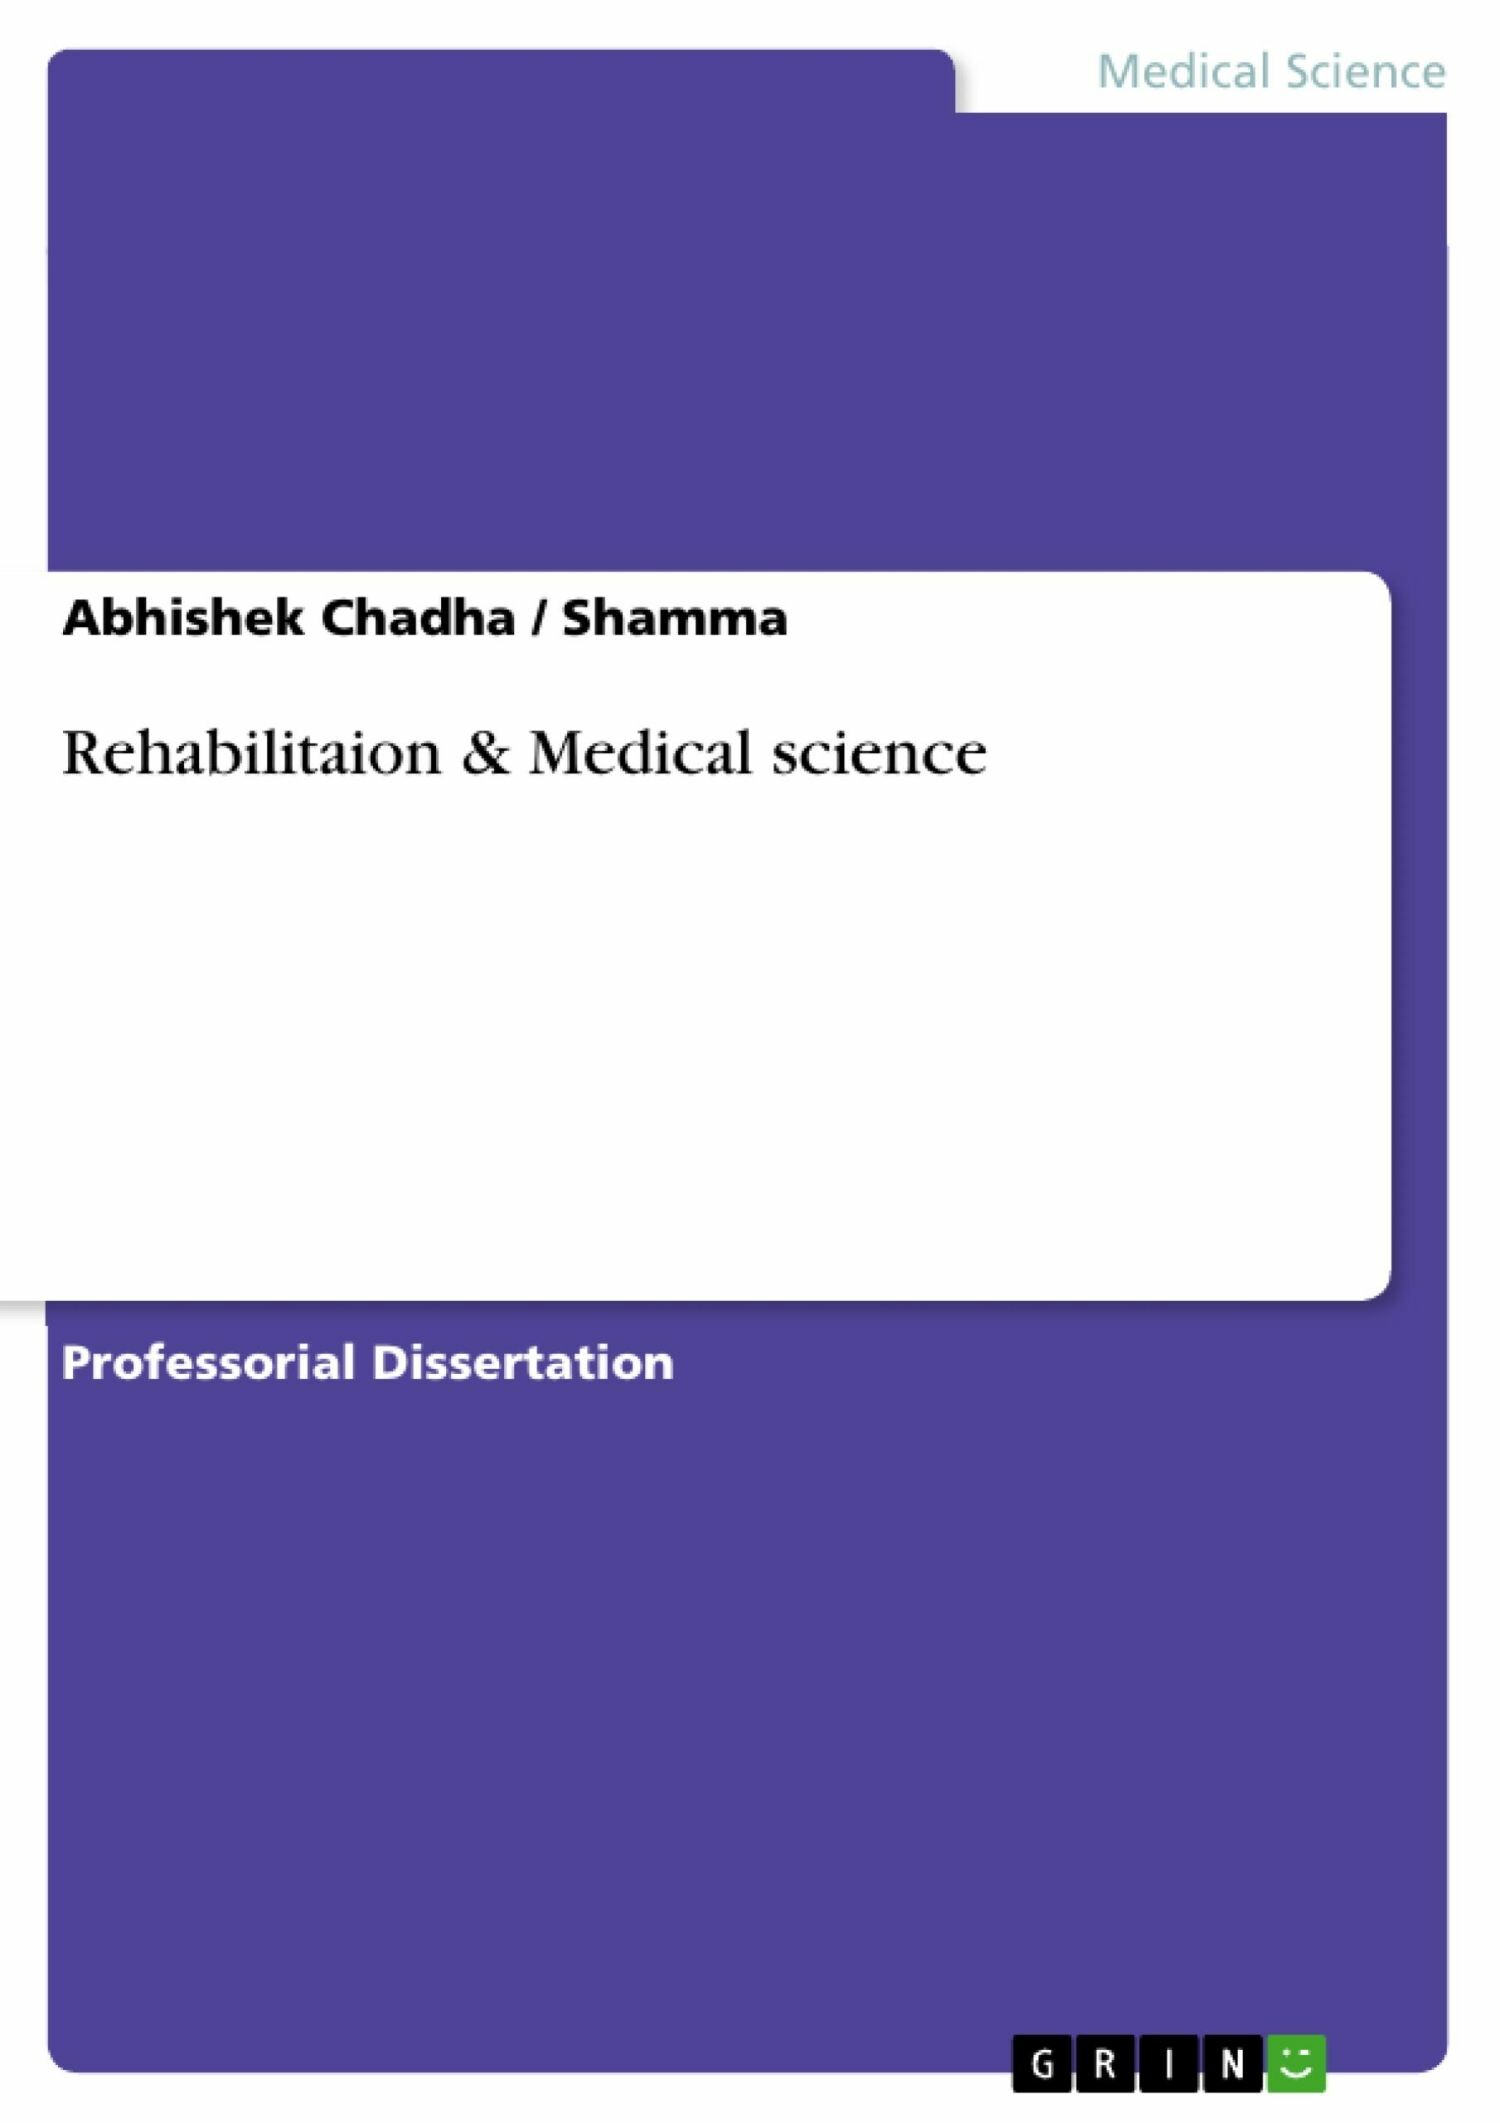 Rehabilitaion & Medical science